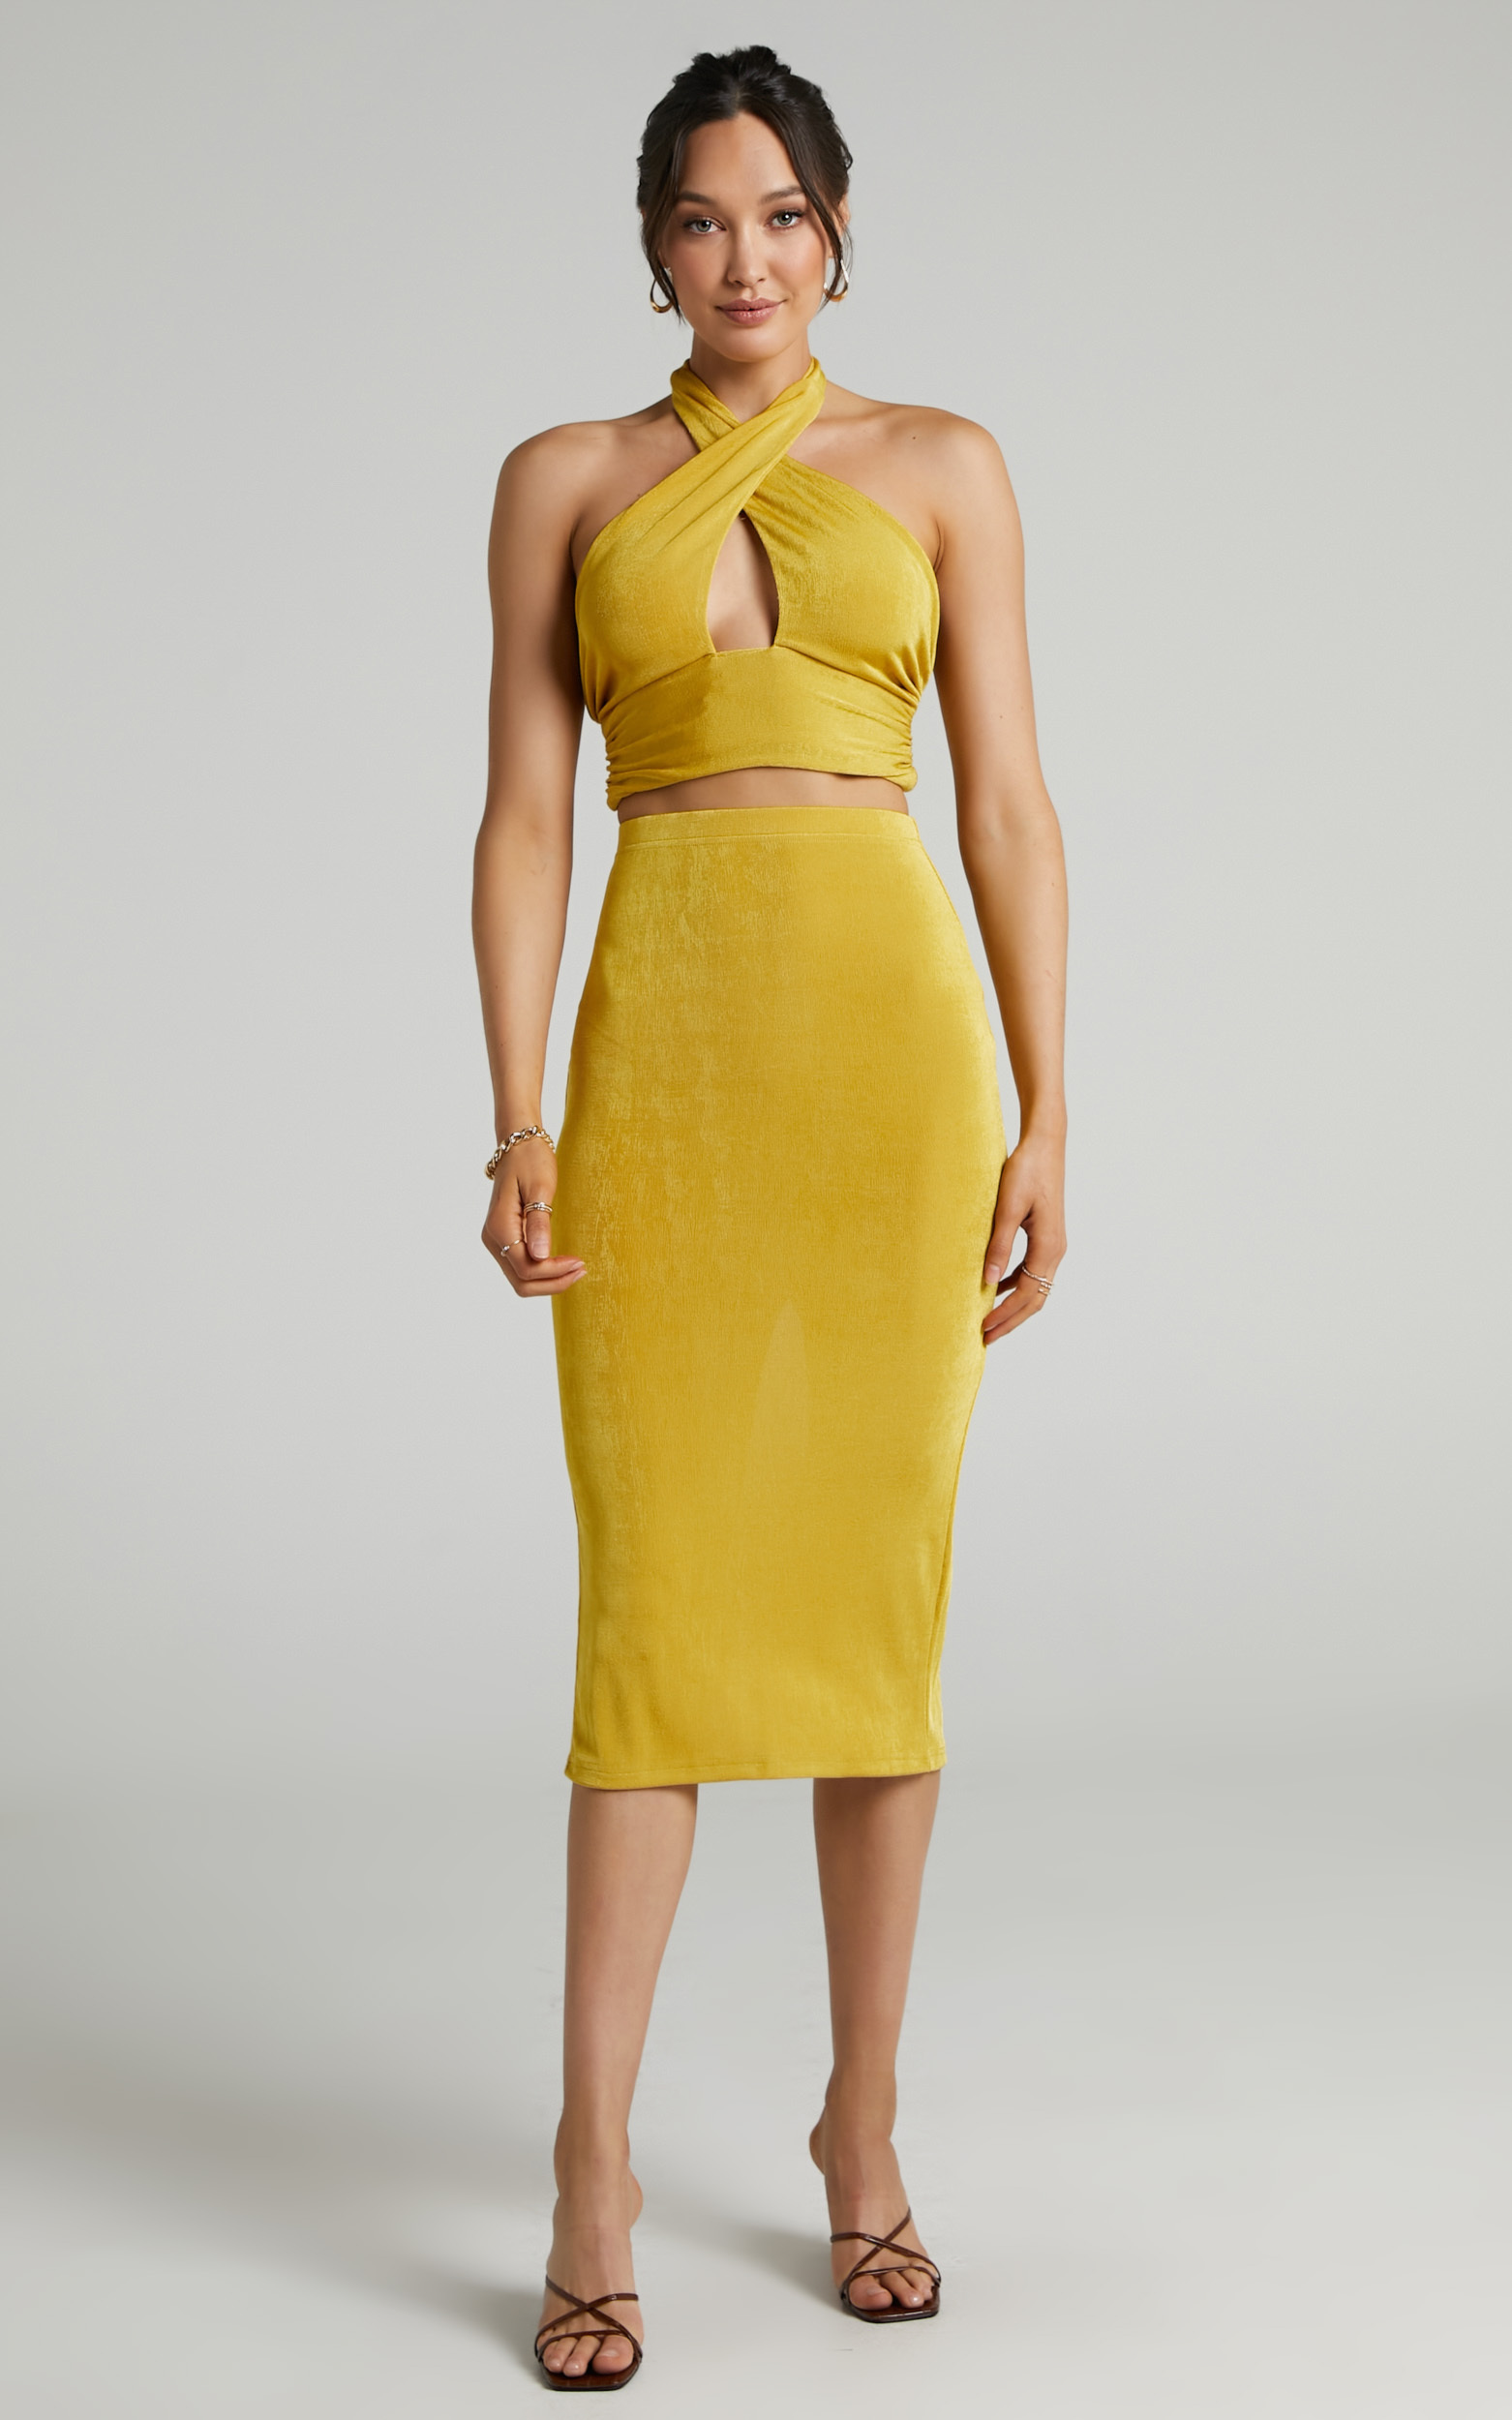 She.Is.Us - On Demand Skirt in Butterscotch - L, YEL1, hi-res image number null